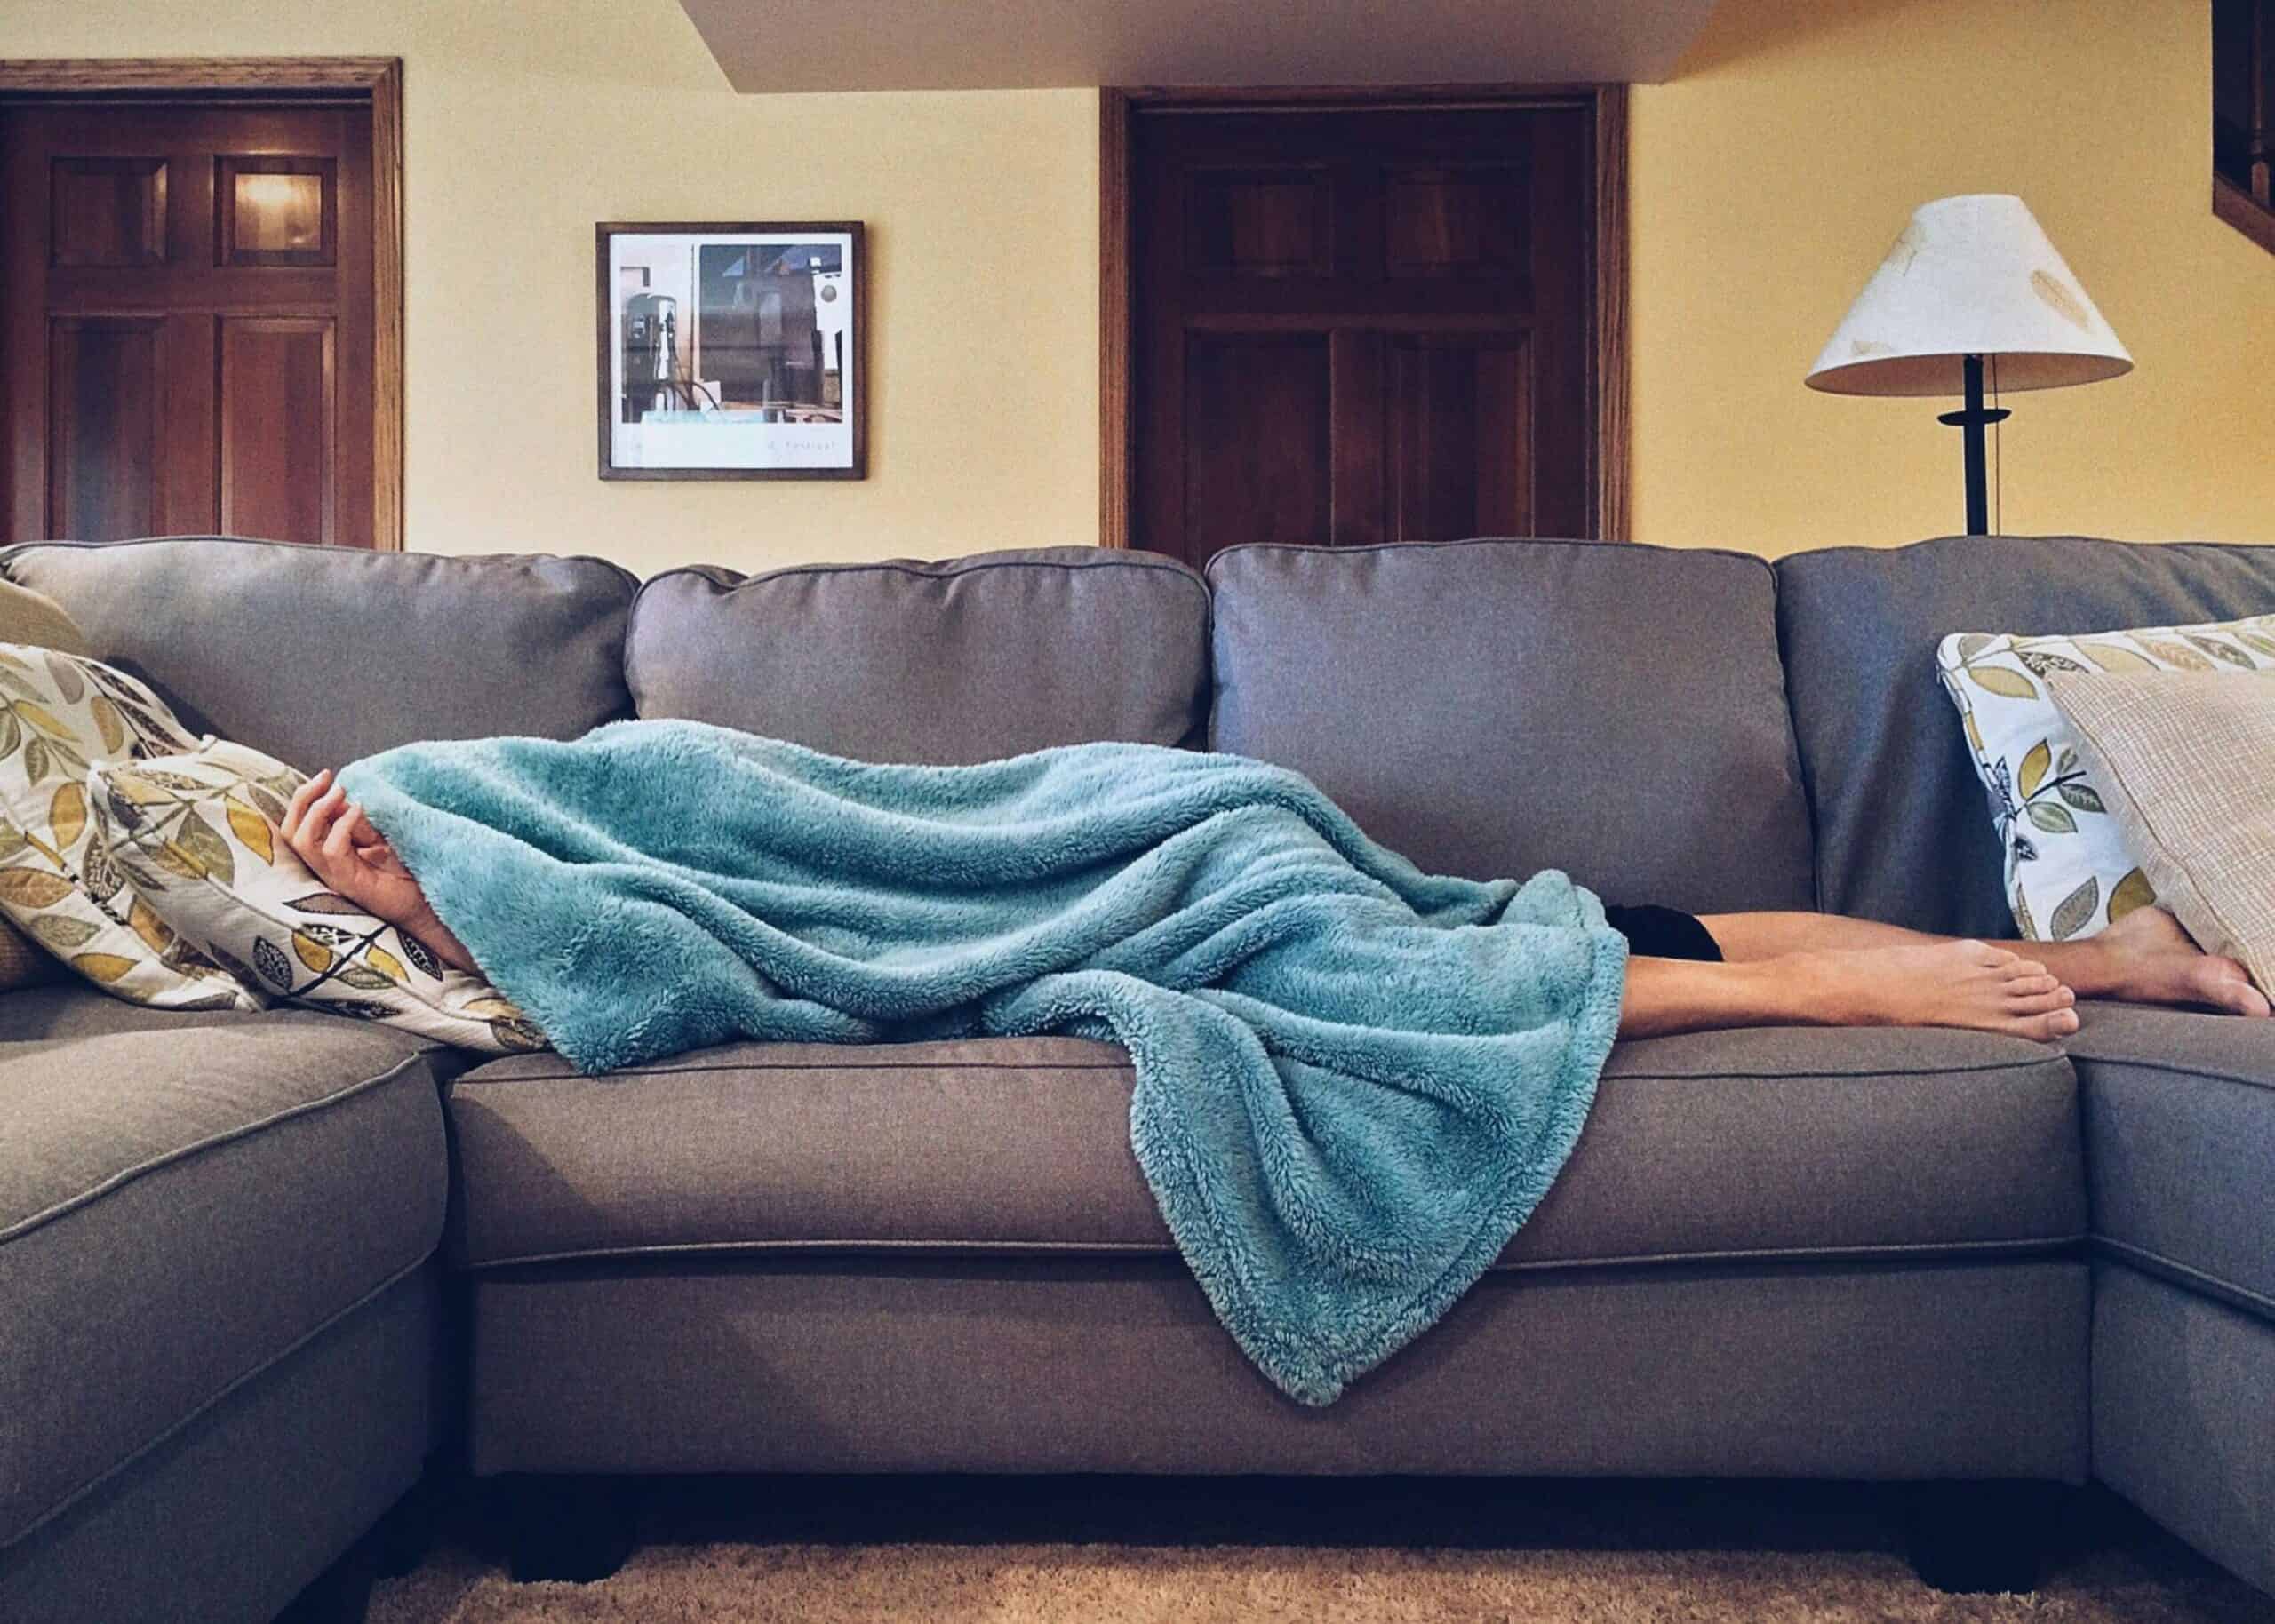 A person sleeping on a couch, dreaming of empowering their midlife through financial planning.